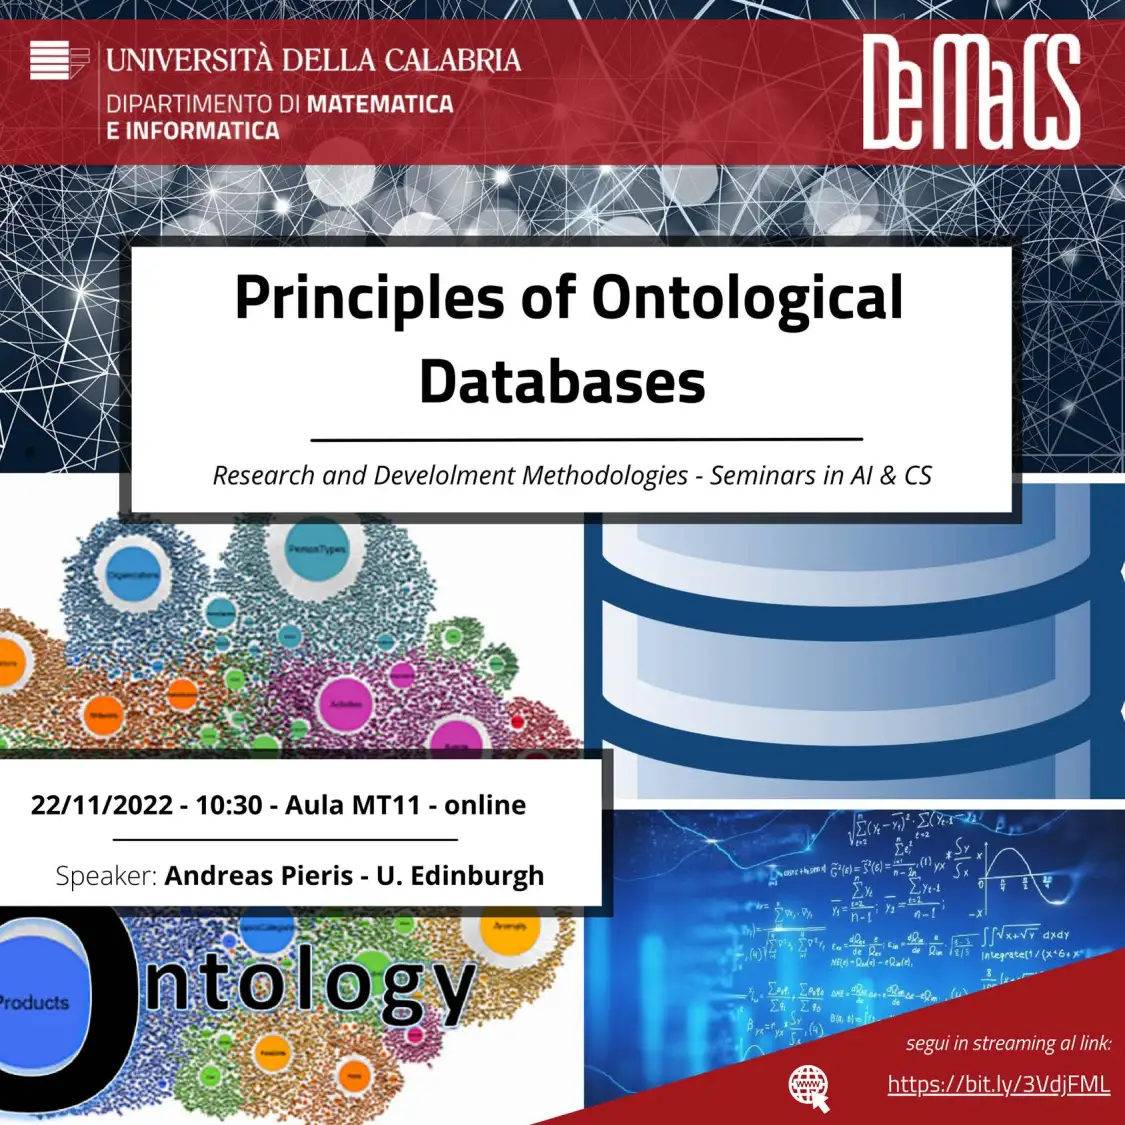 Principles of Ontological Databases, prof. Andreas Pieris, 22/11/2022